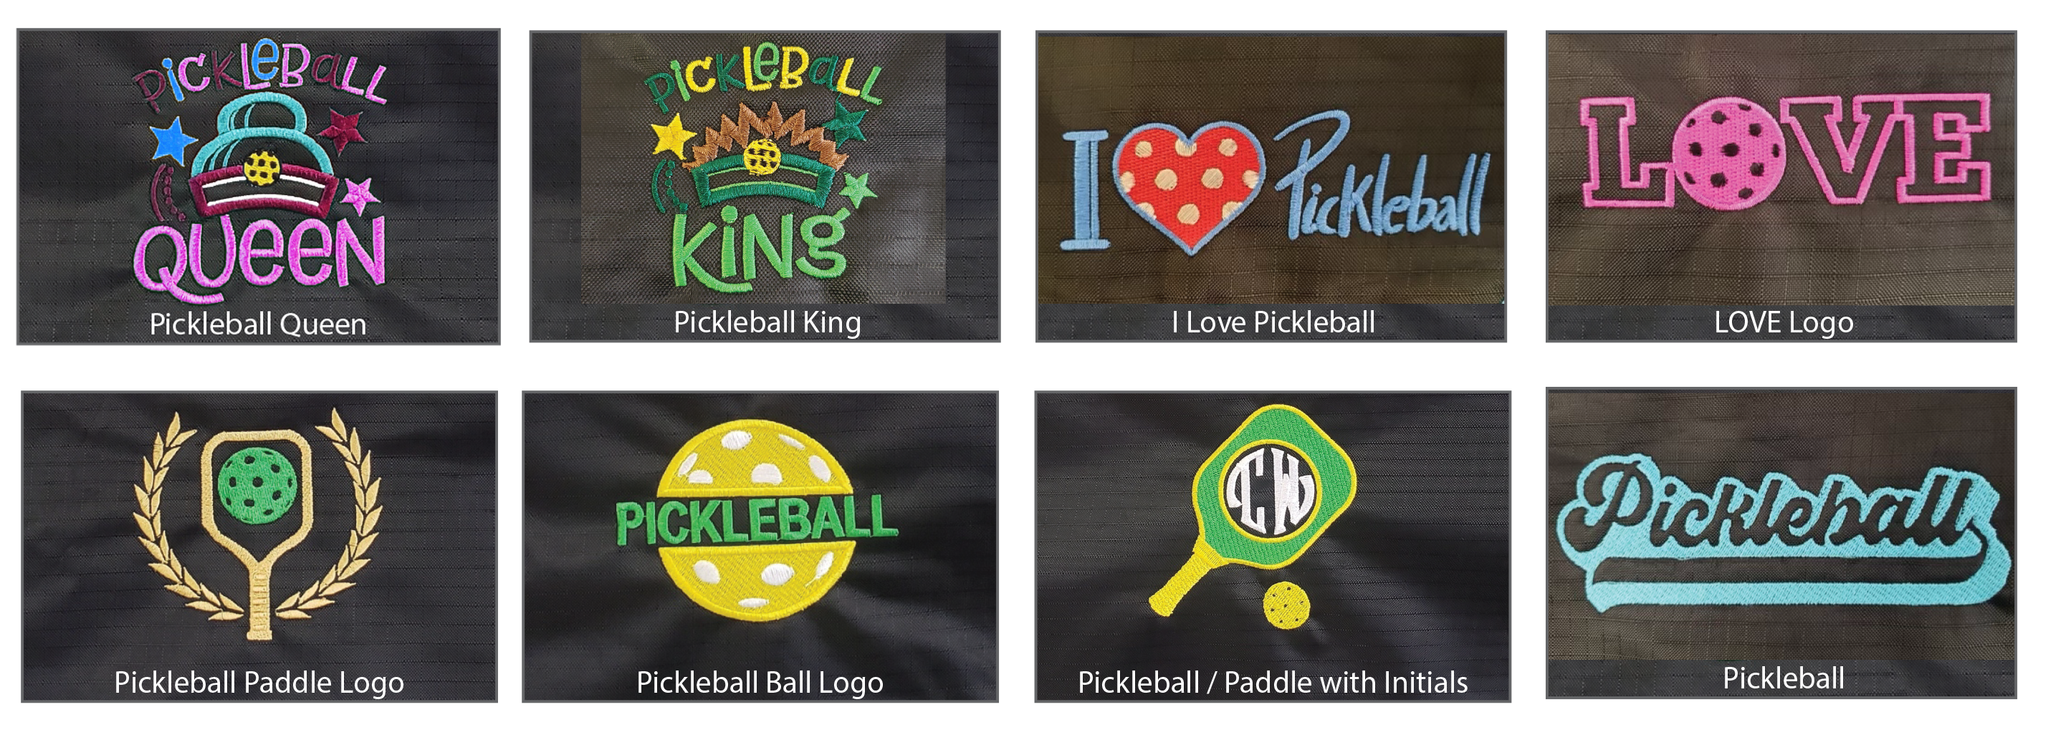 Personal Pickleball Tote with Pickleball Logo & Custom Name (patented)